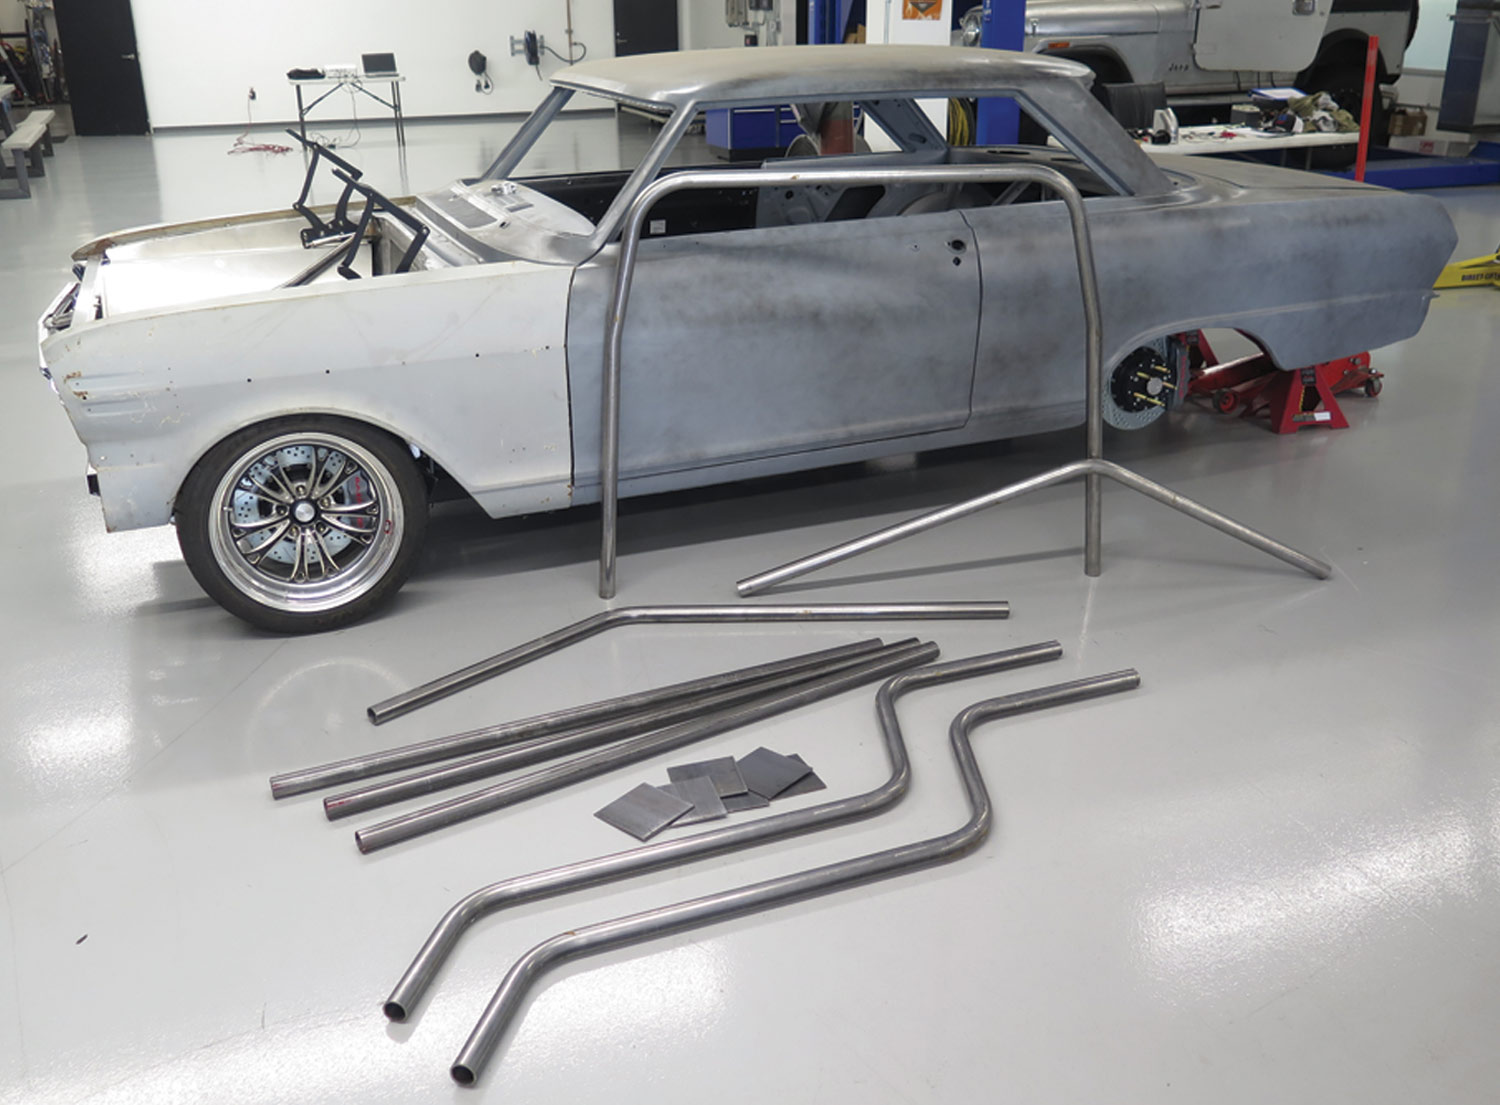 car with bent steel tubes near by, prepared for installation